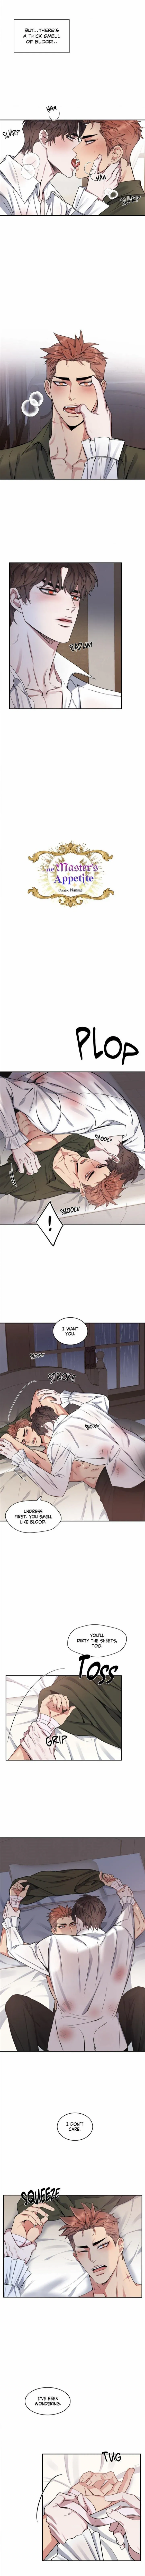 A Young Master - Page 3